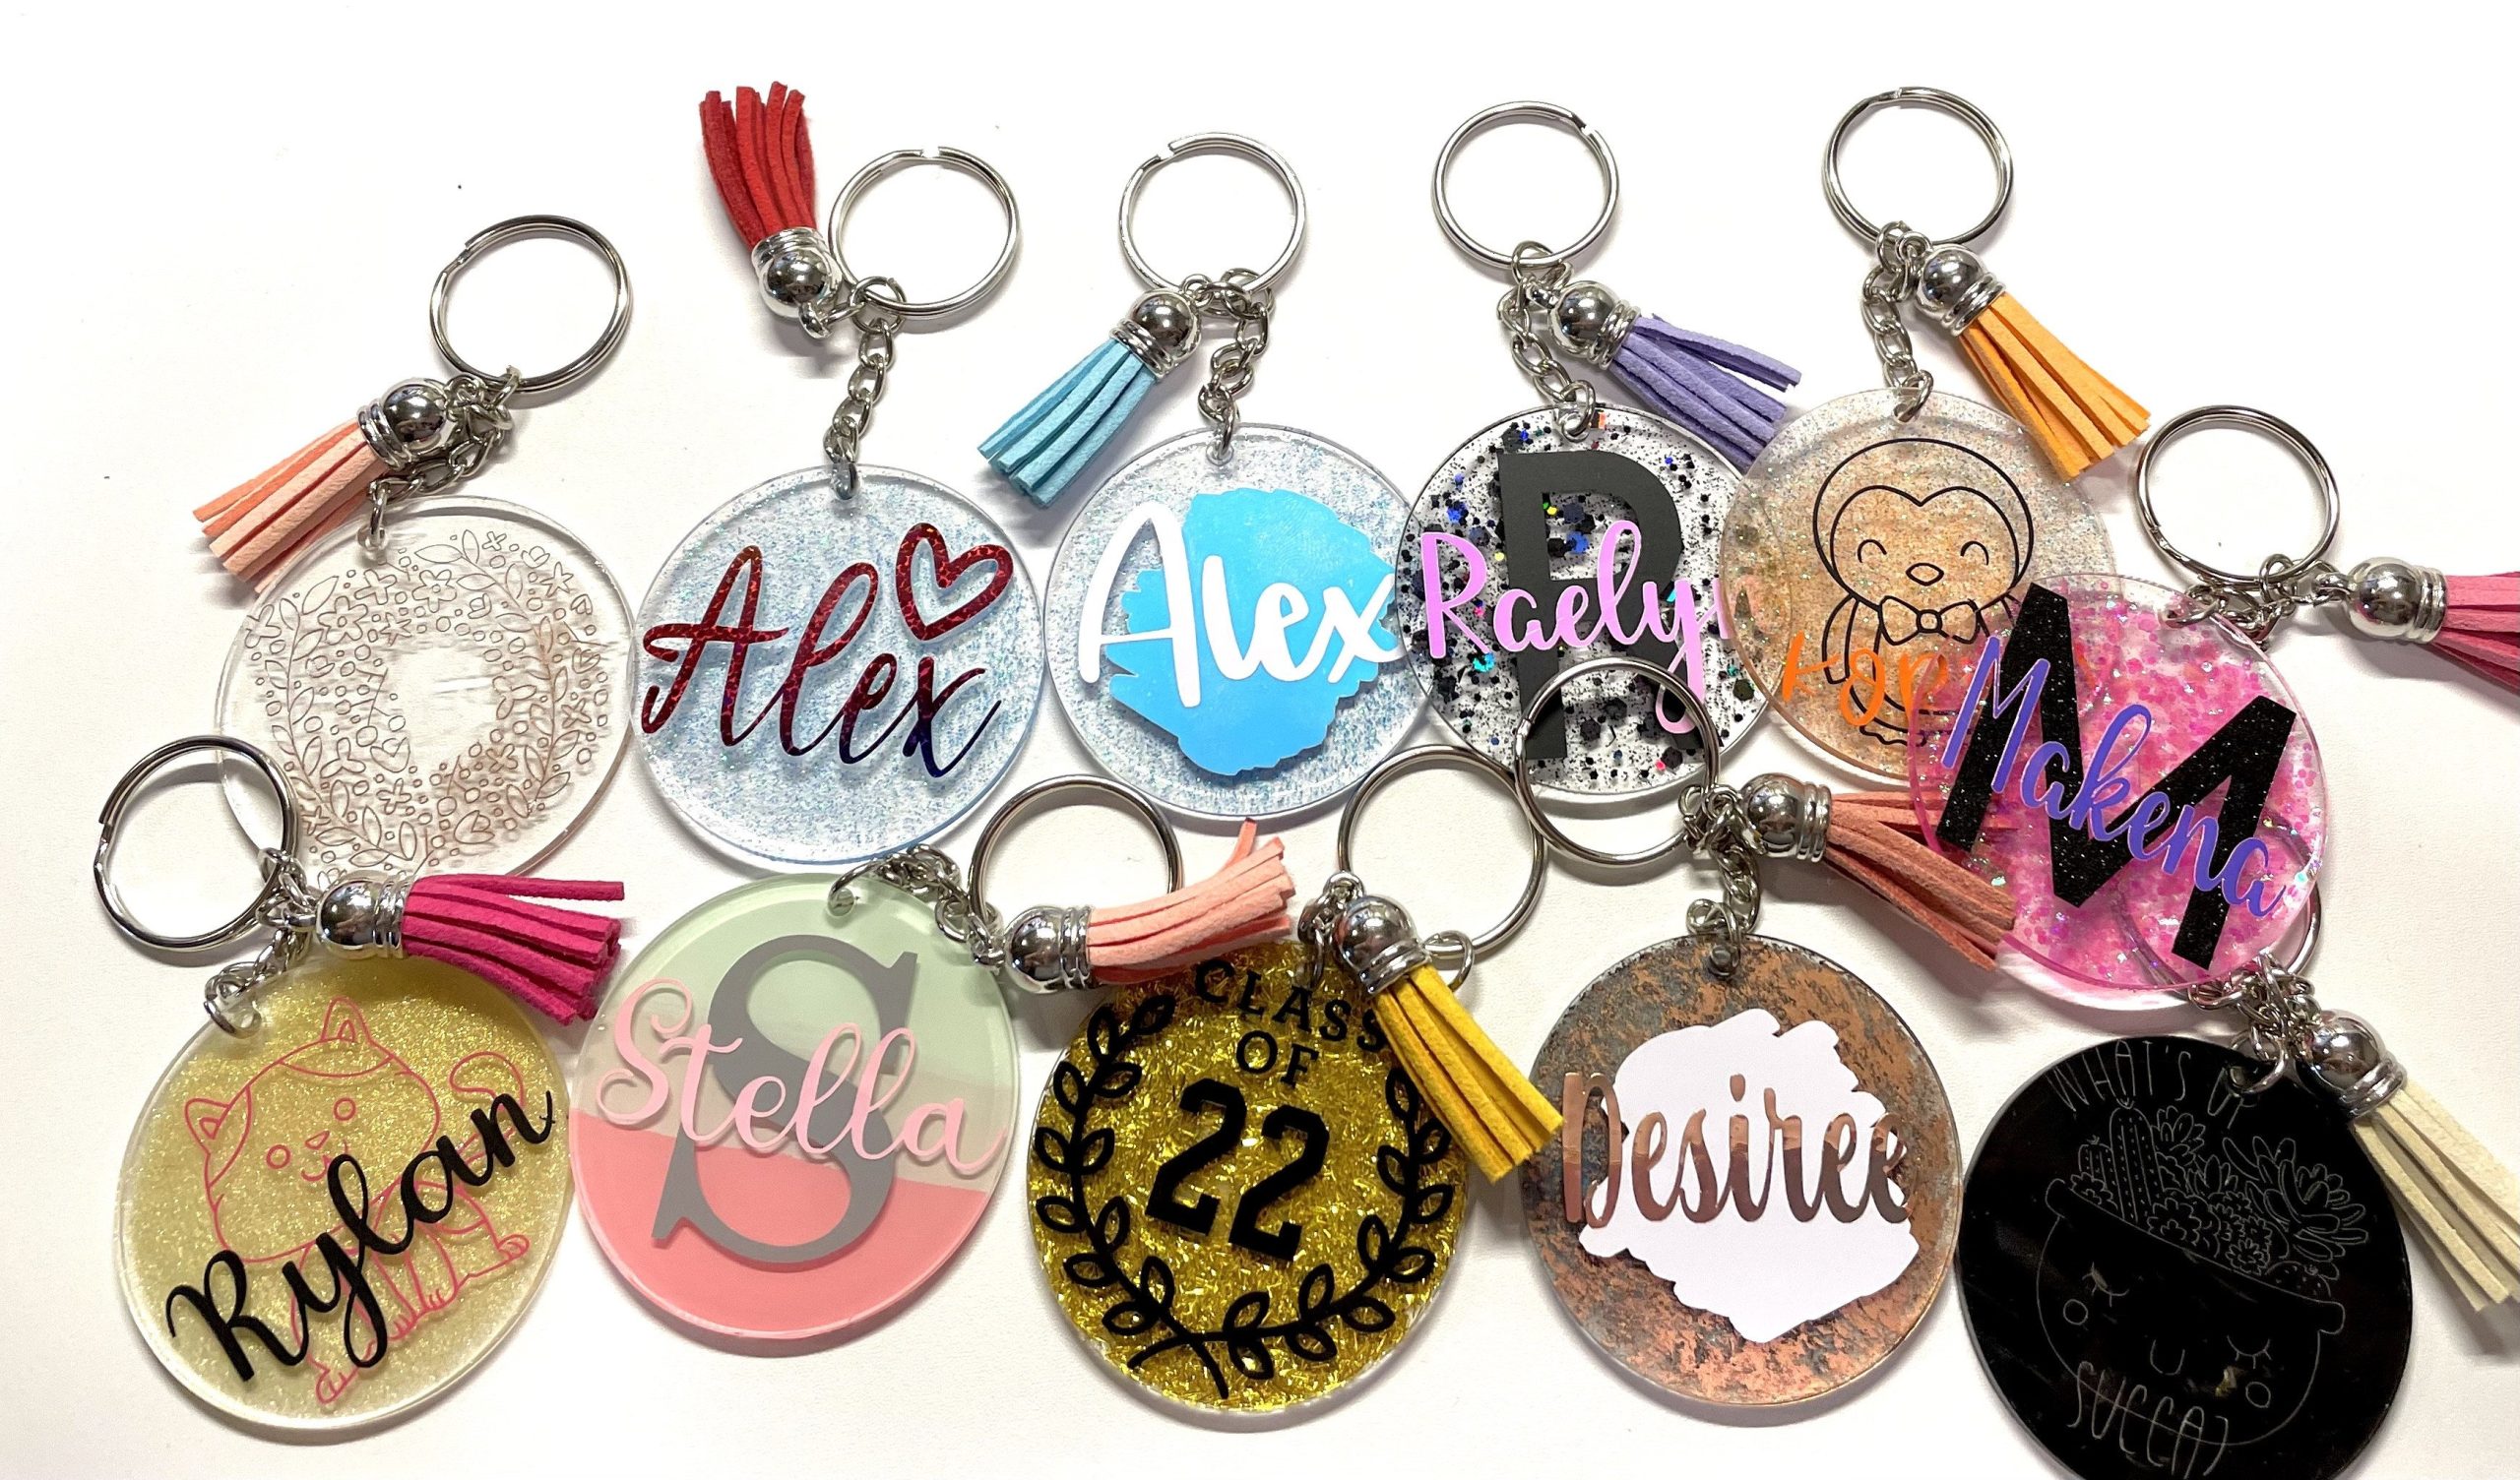 Acrylic Keychains Make Great Gifts